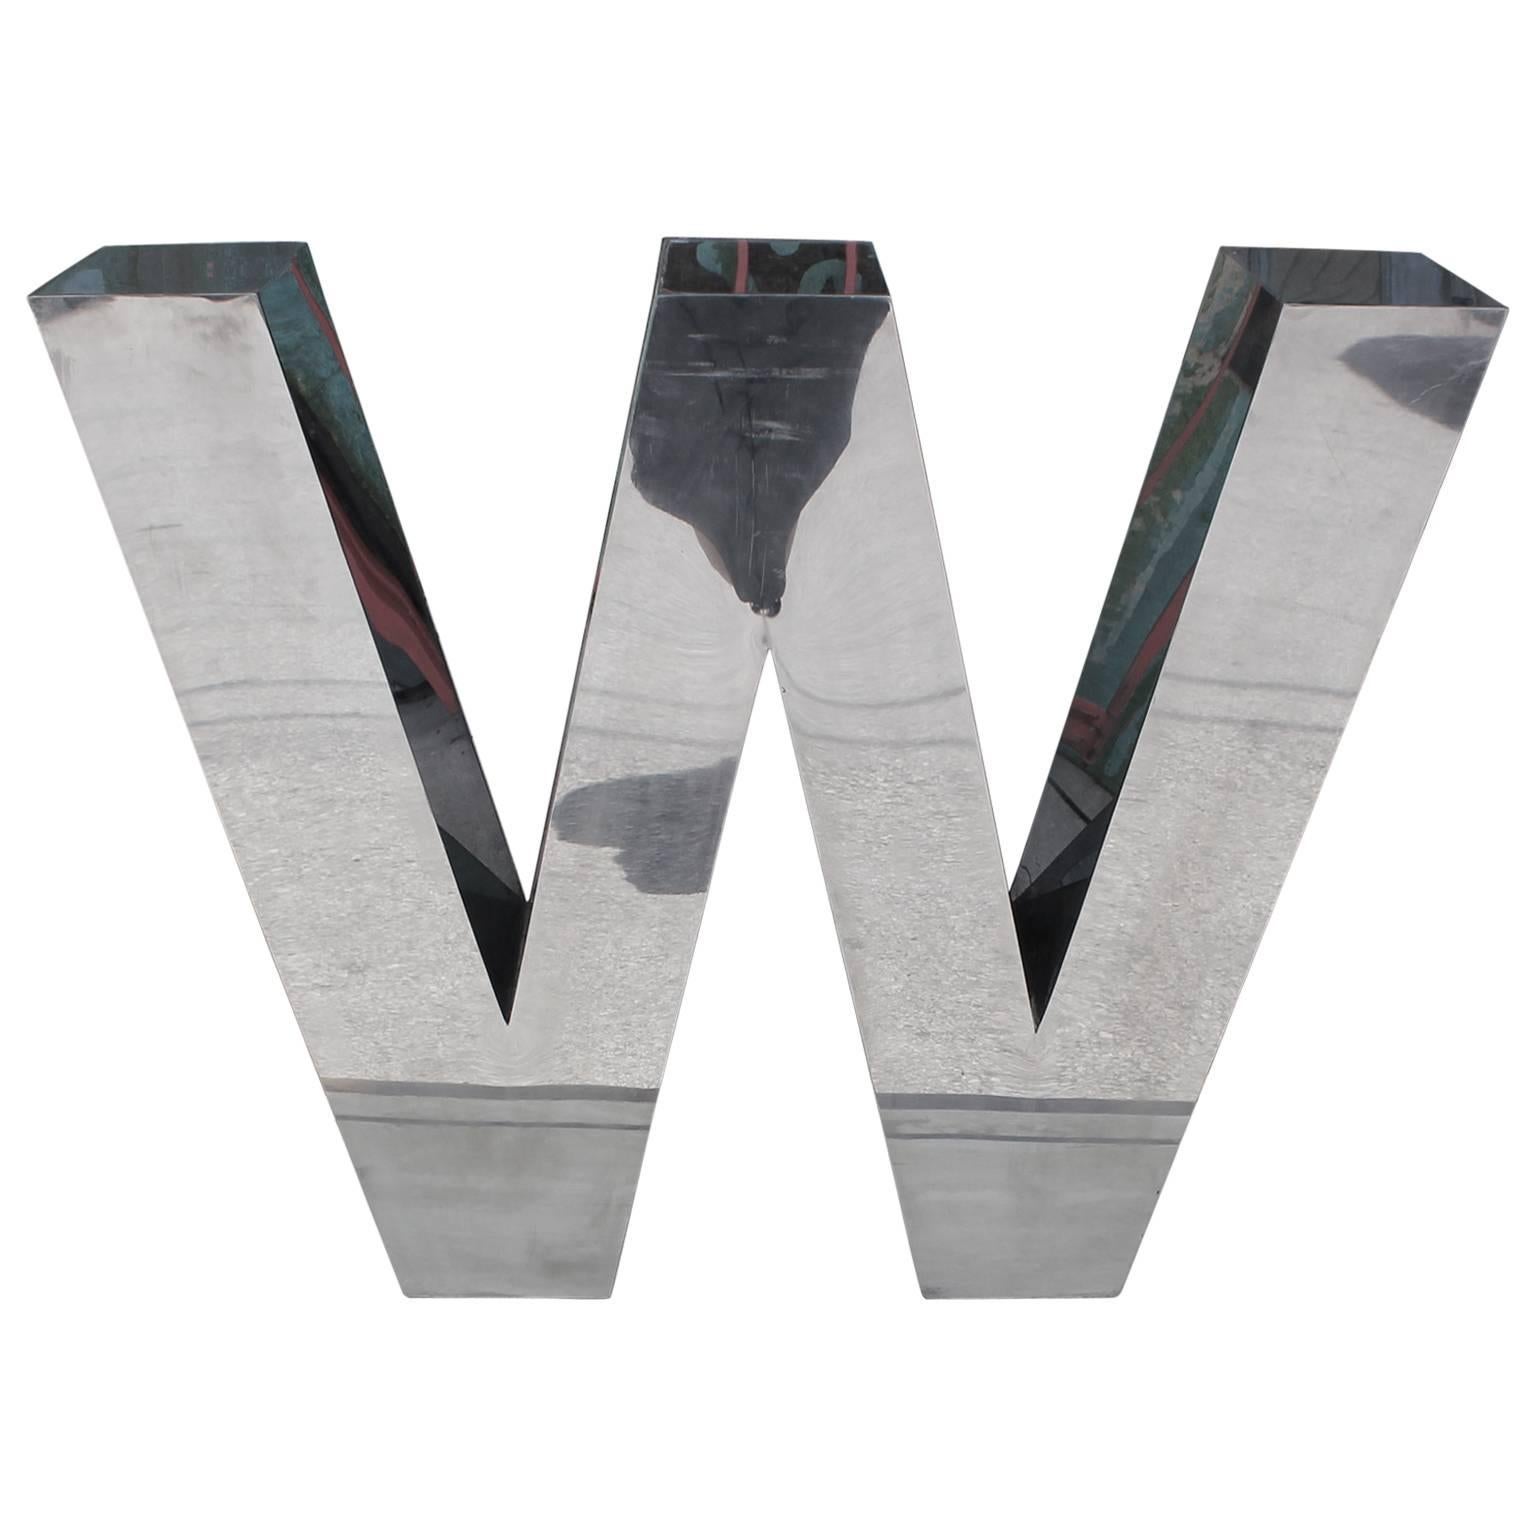 Striking Large-Scale Chrome Stainless Steel Letter W